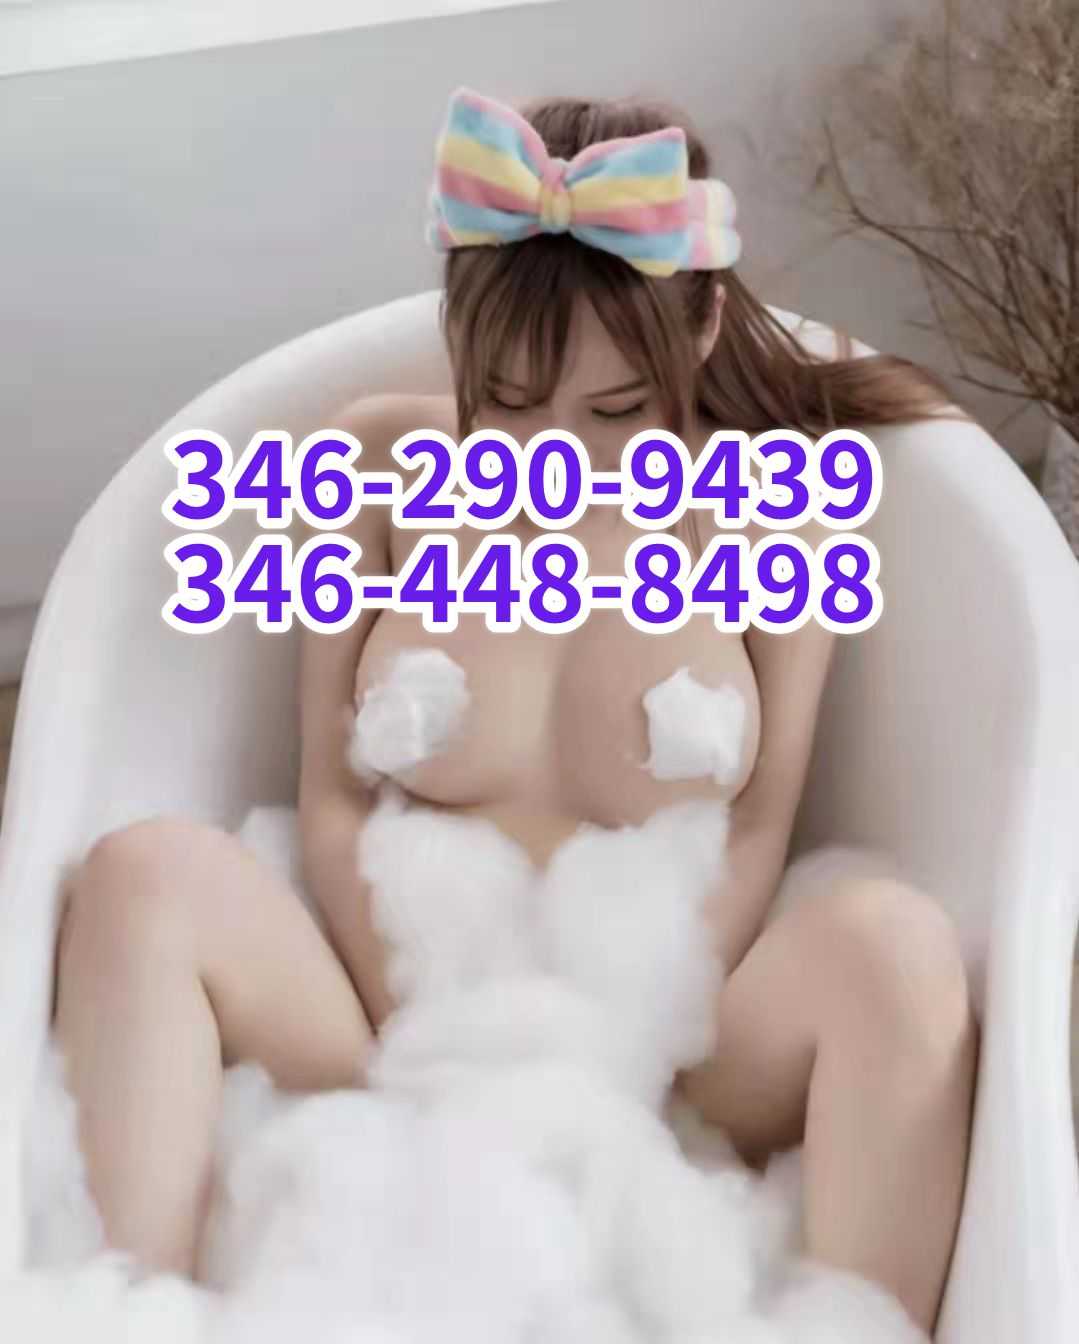 Reviews about escort with phone number 3462909439